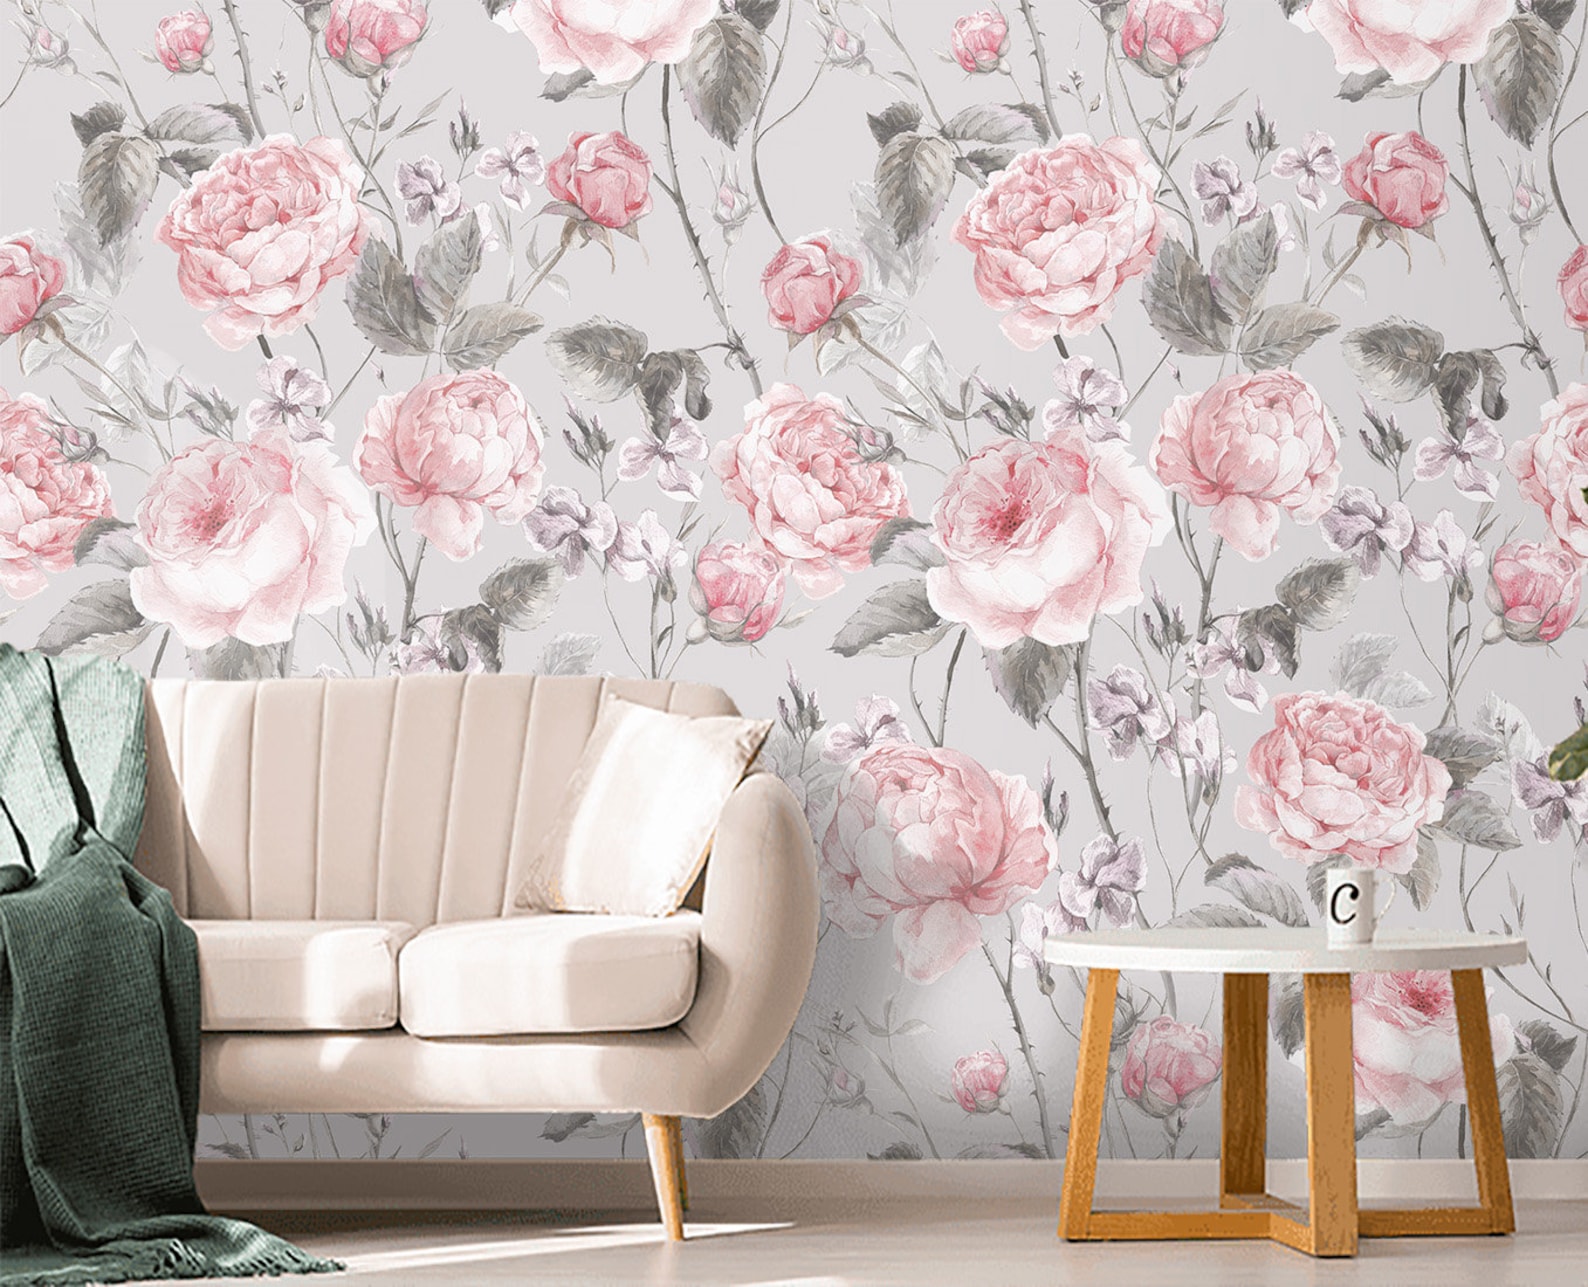 Floral Wallpaper Vintage Gray Pink Roses Wall Paper Peel and | Etsy